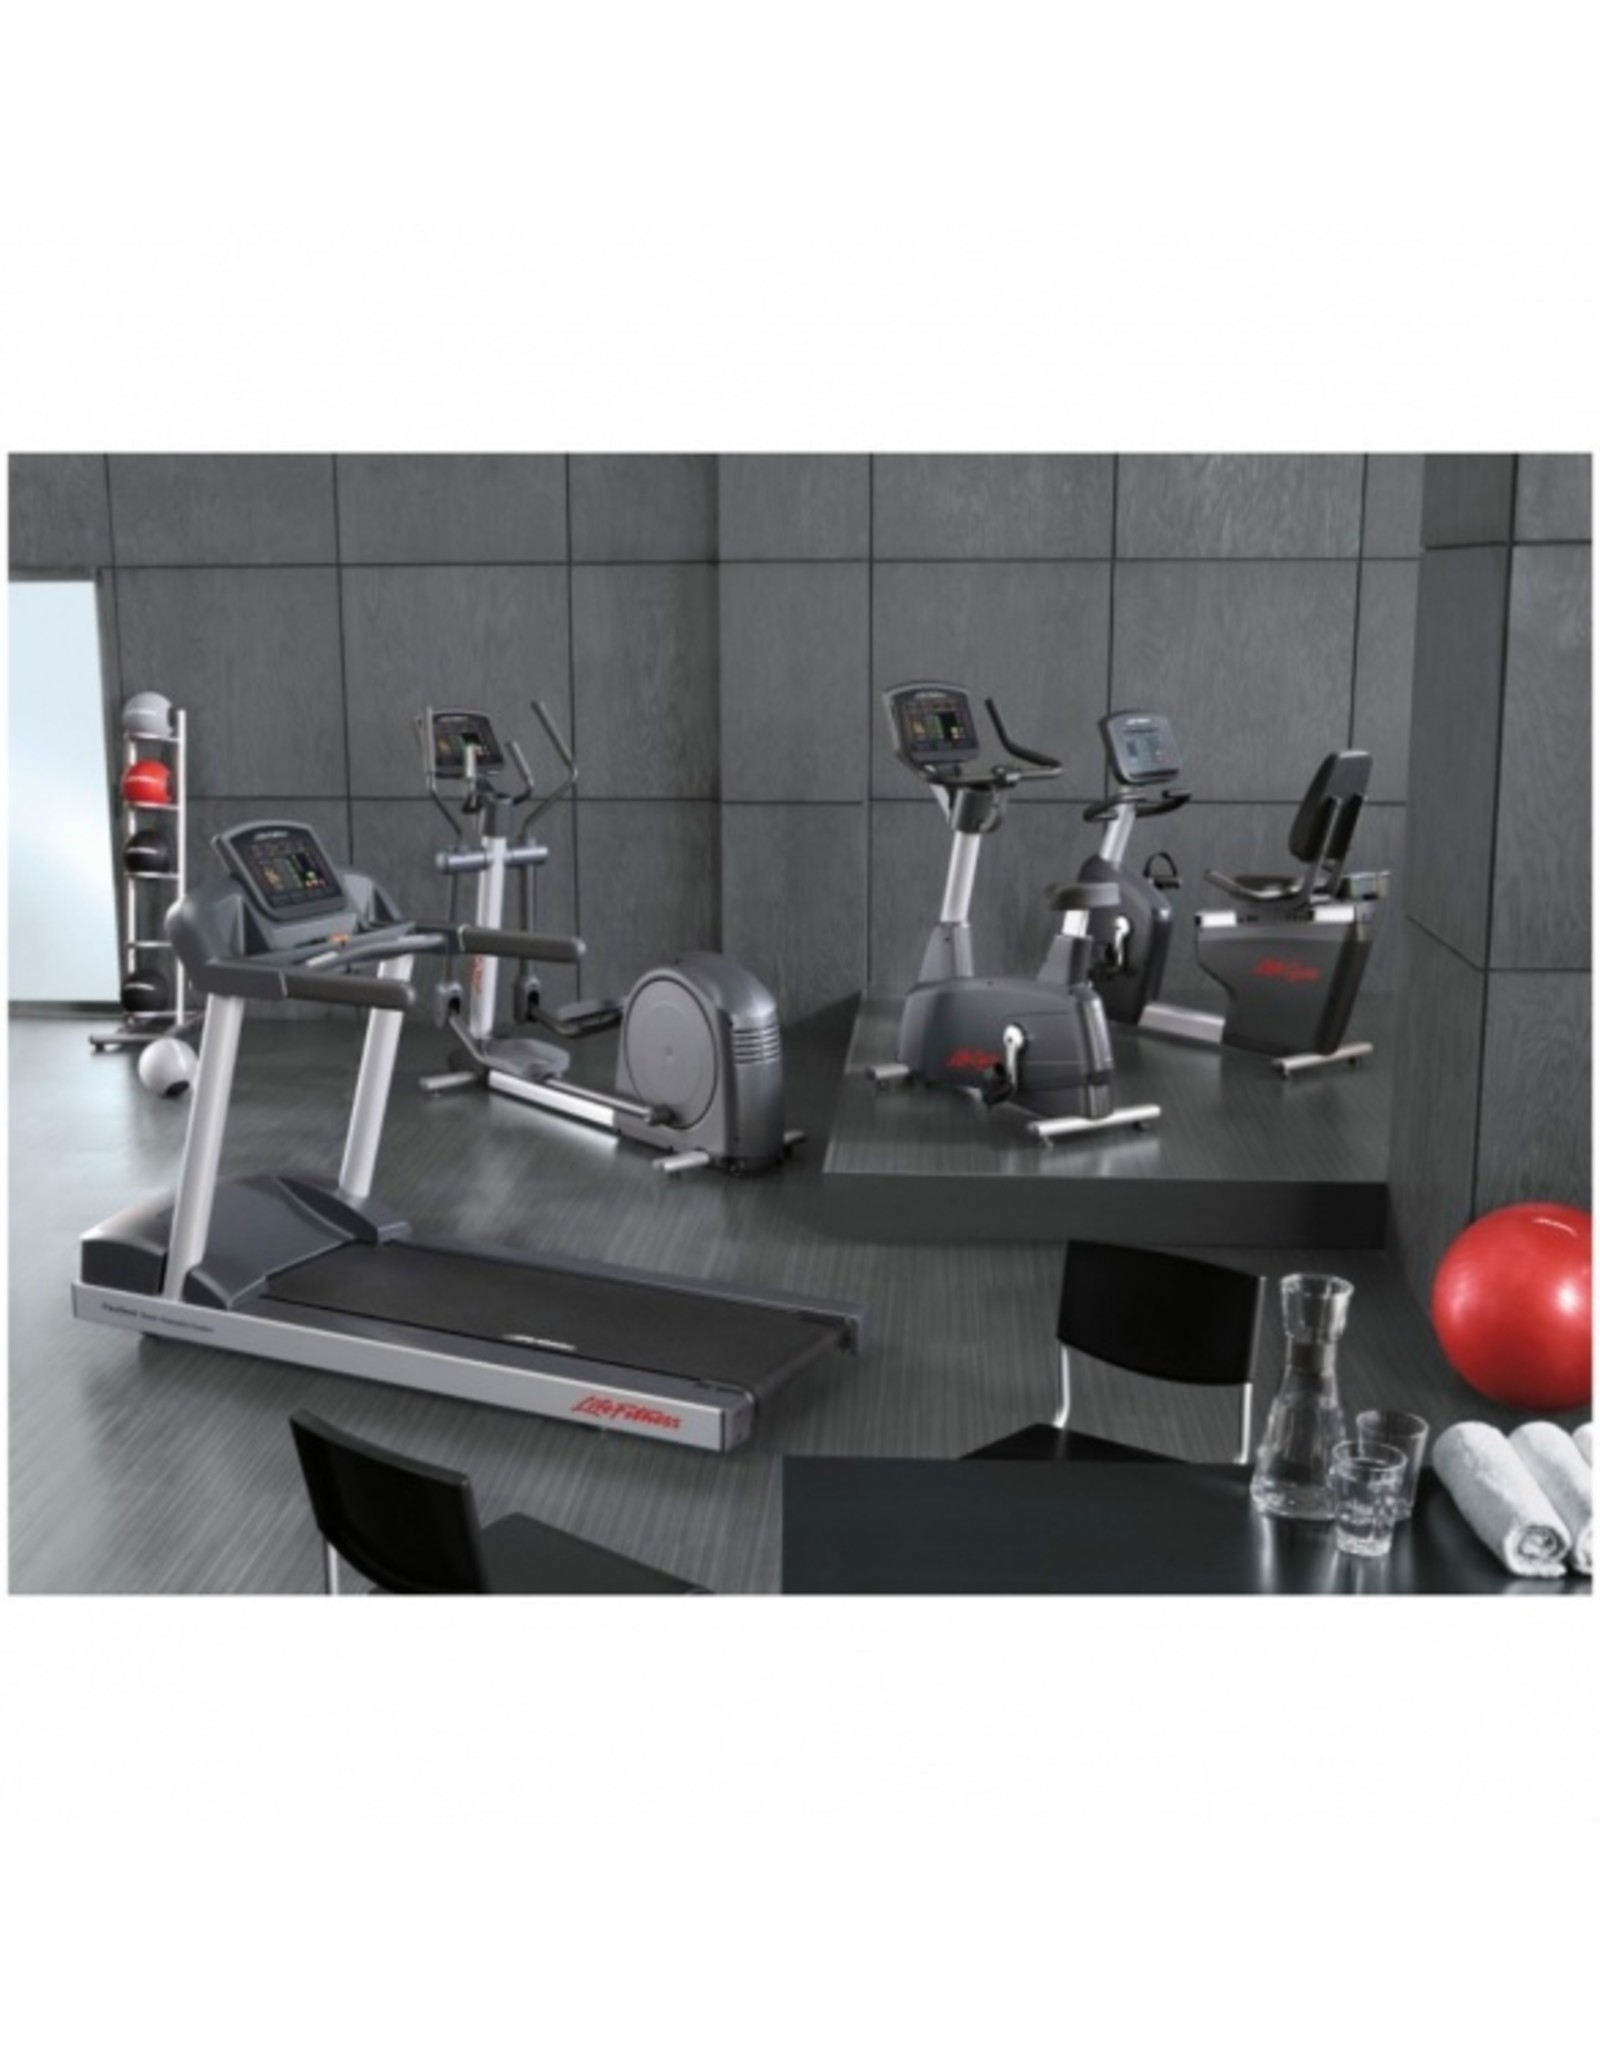 Life Fitness Activity series upright bike with LED console-dut